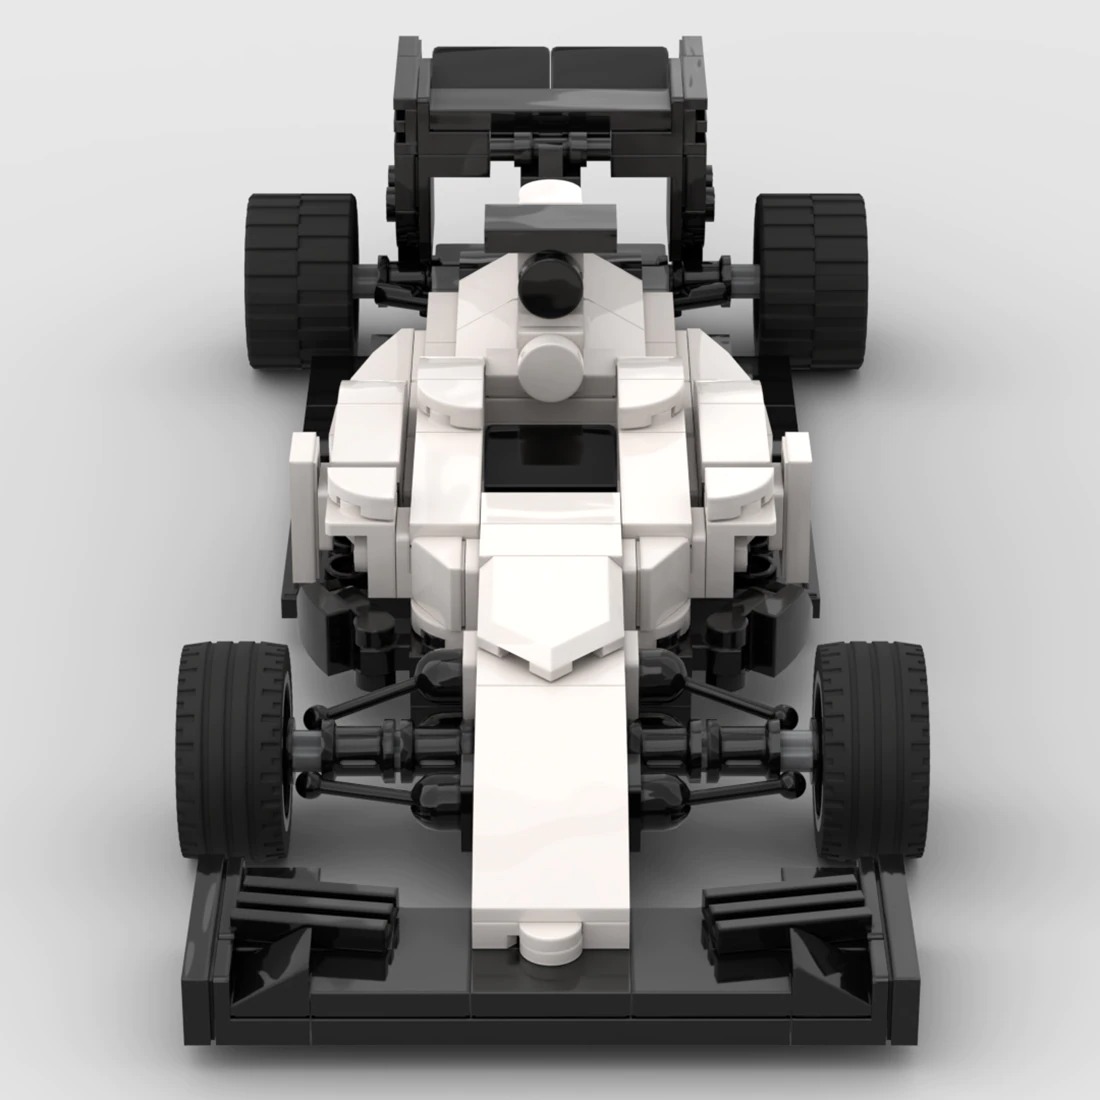 F1 Williams FW-37 MOC-98825 Technic With 256 Pieces